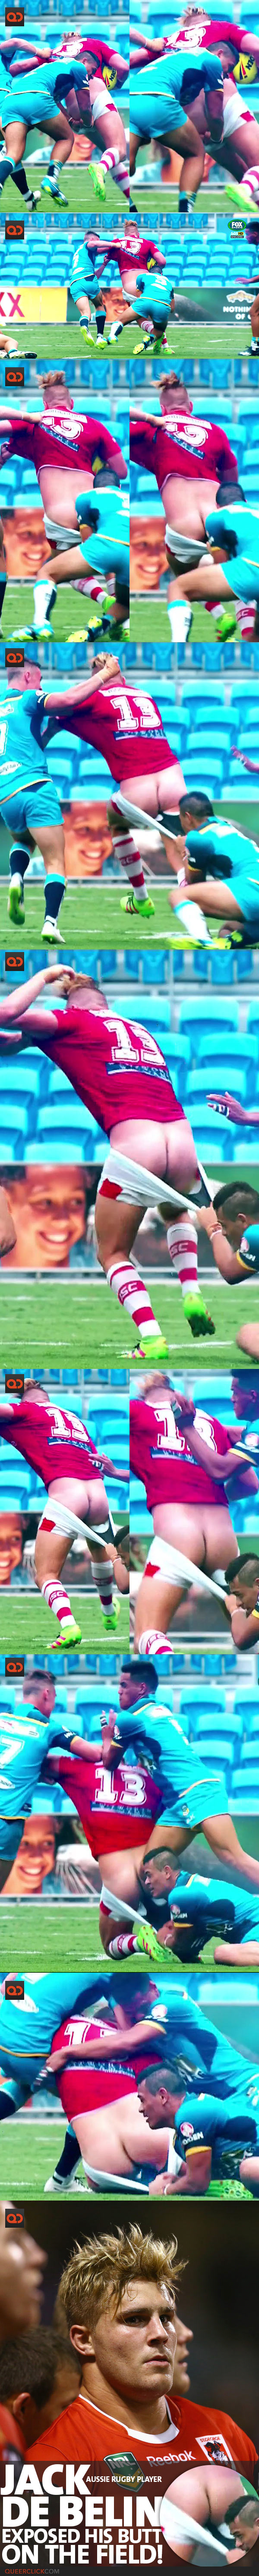 qc-aussie_rugby_player_jack_de_belin_exposed_his_butt_on_the_field-collage03